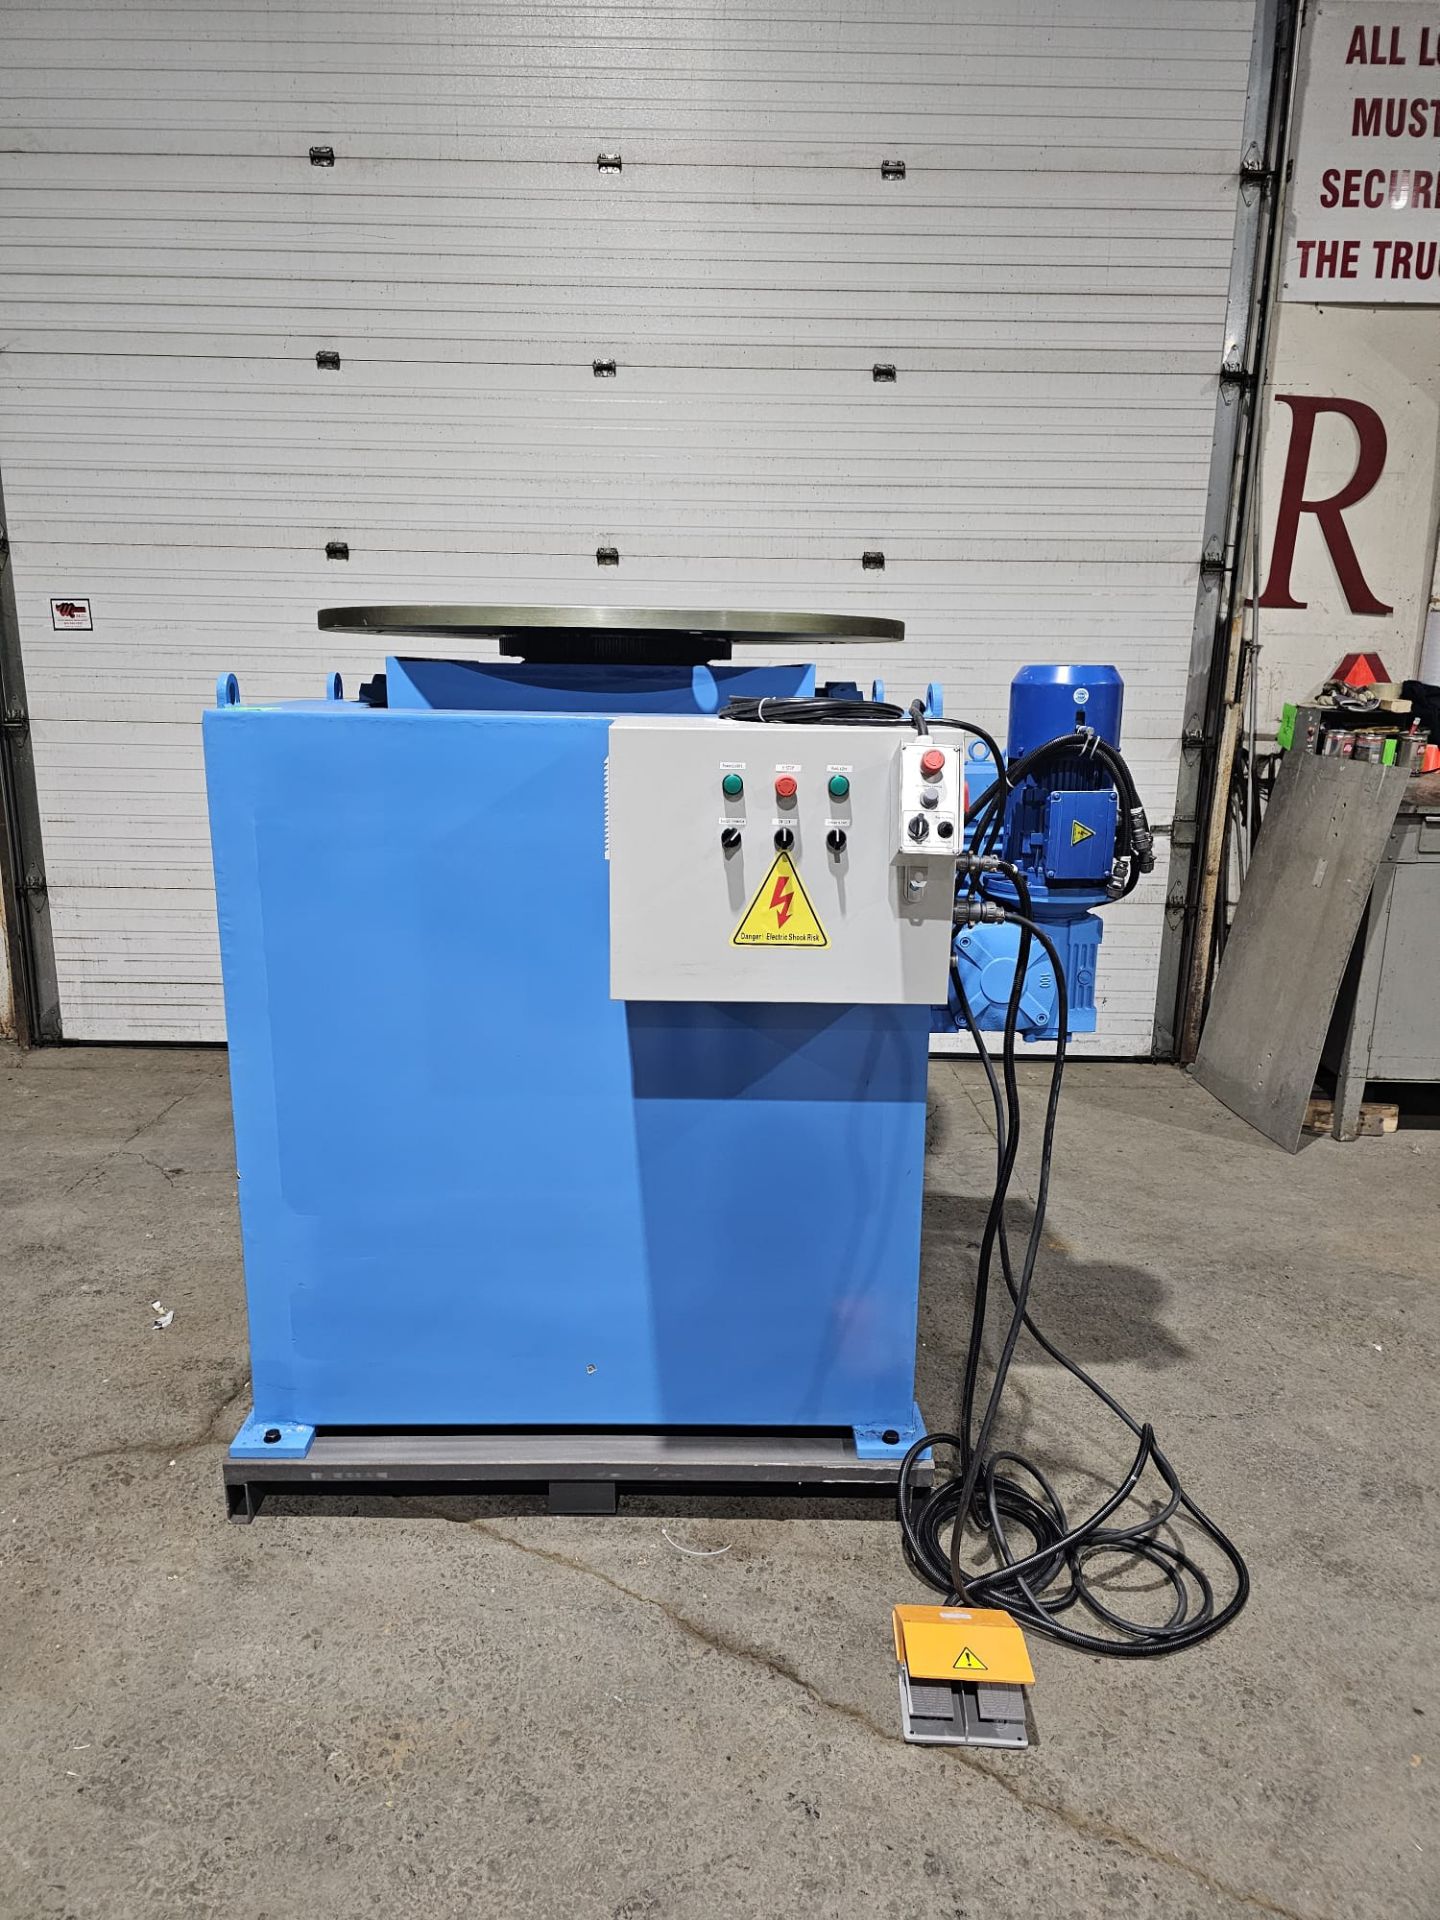 Verner model VD-8000 WELDING POSITIONER 8000lbs capacity - tilt and rotate with variable speed drive - Image 8 of 9